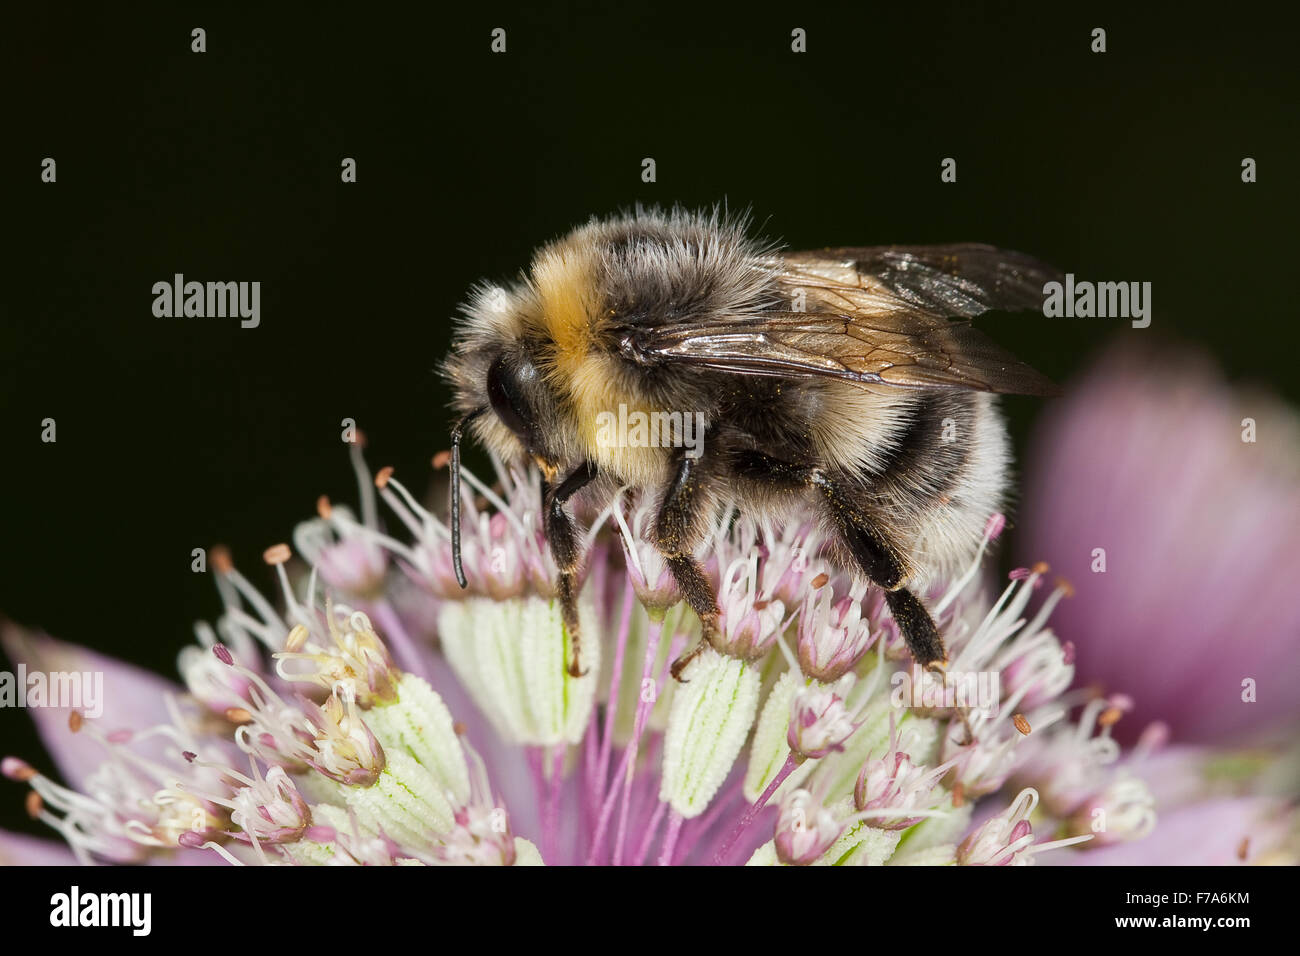 White-tailed Bumble Bee, Bumblebee, Helle Erdhummel, Weißschwanz-Erdhummel, Hellgelbe Erdhummel, Bombus lucorum, Blütenbesuch Foto Stock